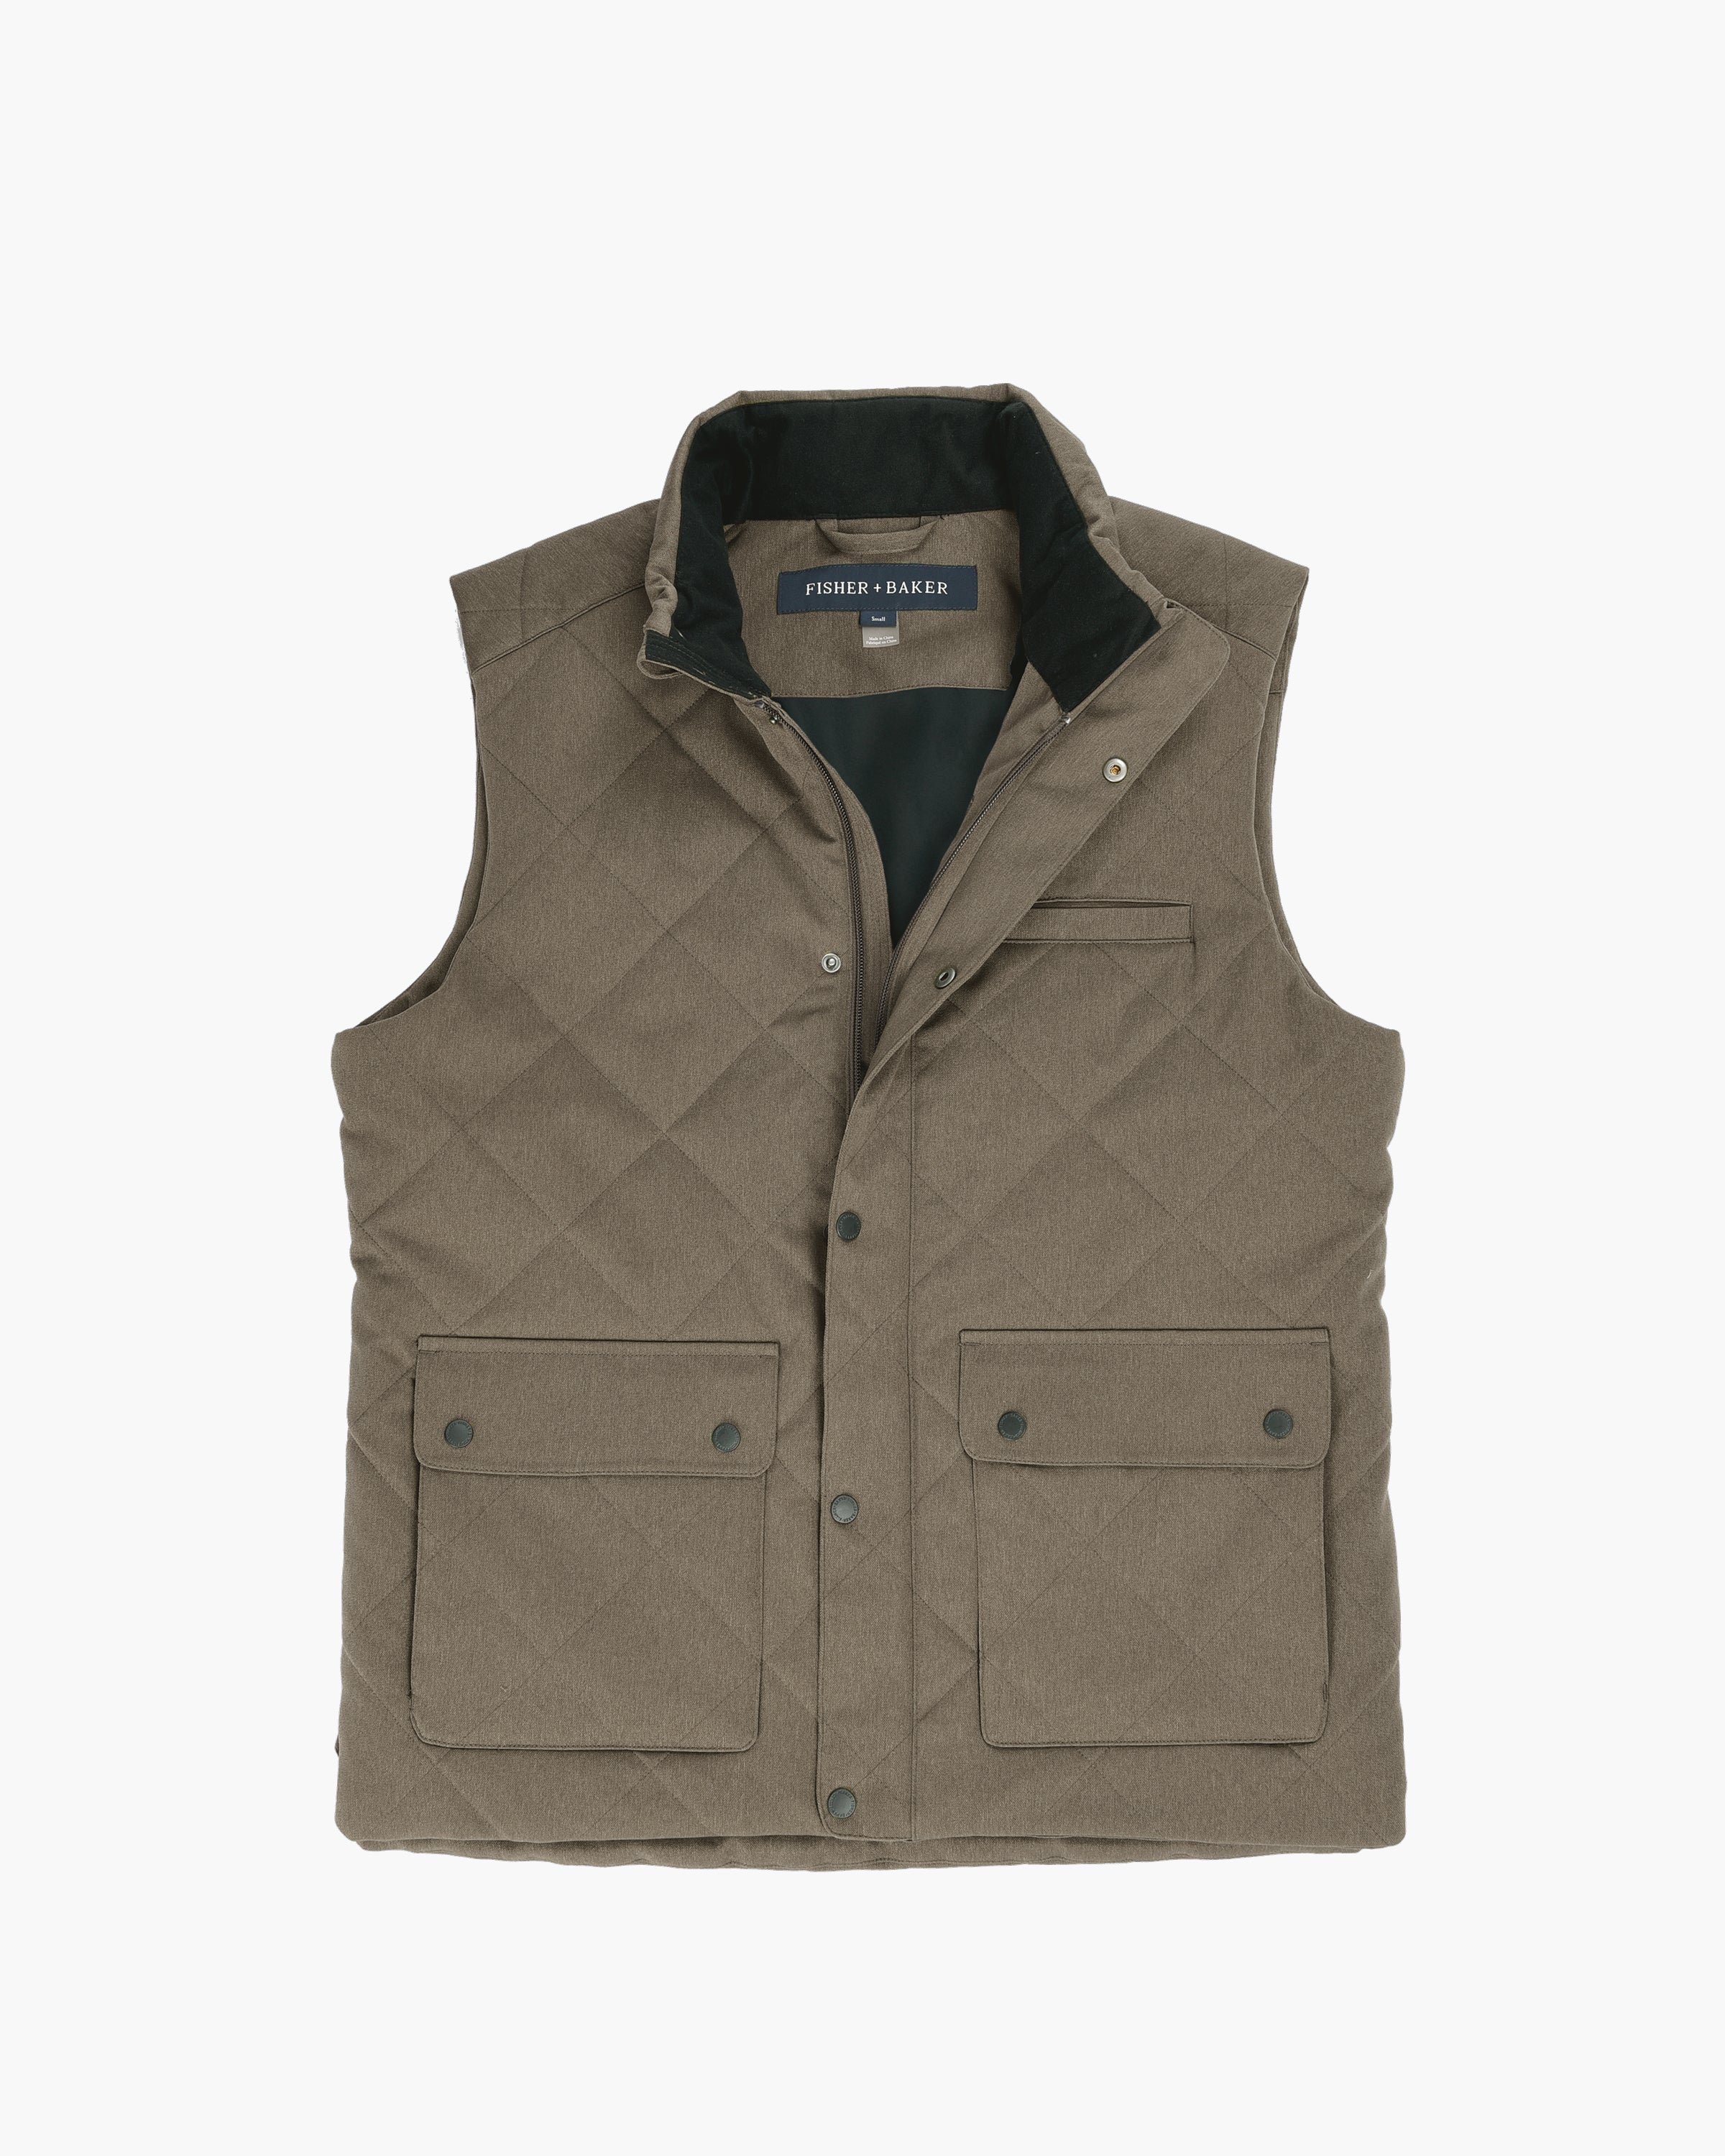 Men's Insulated and Lined Vest the Lexington Vest by Fisher + Baker